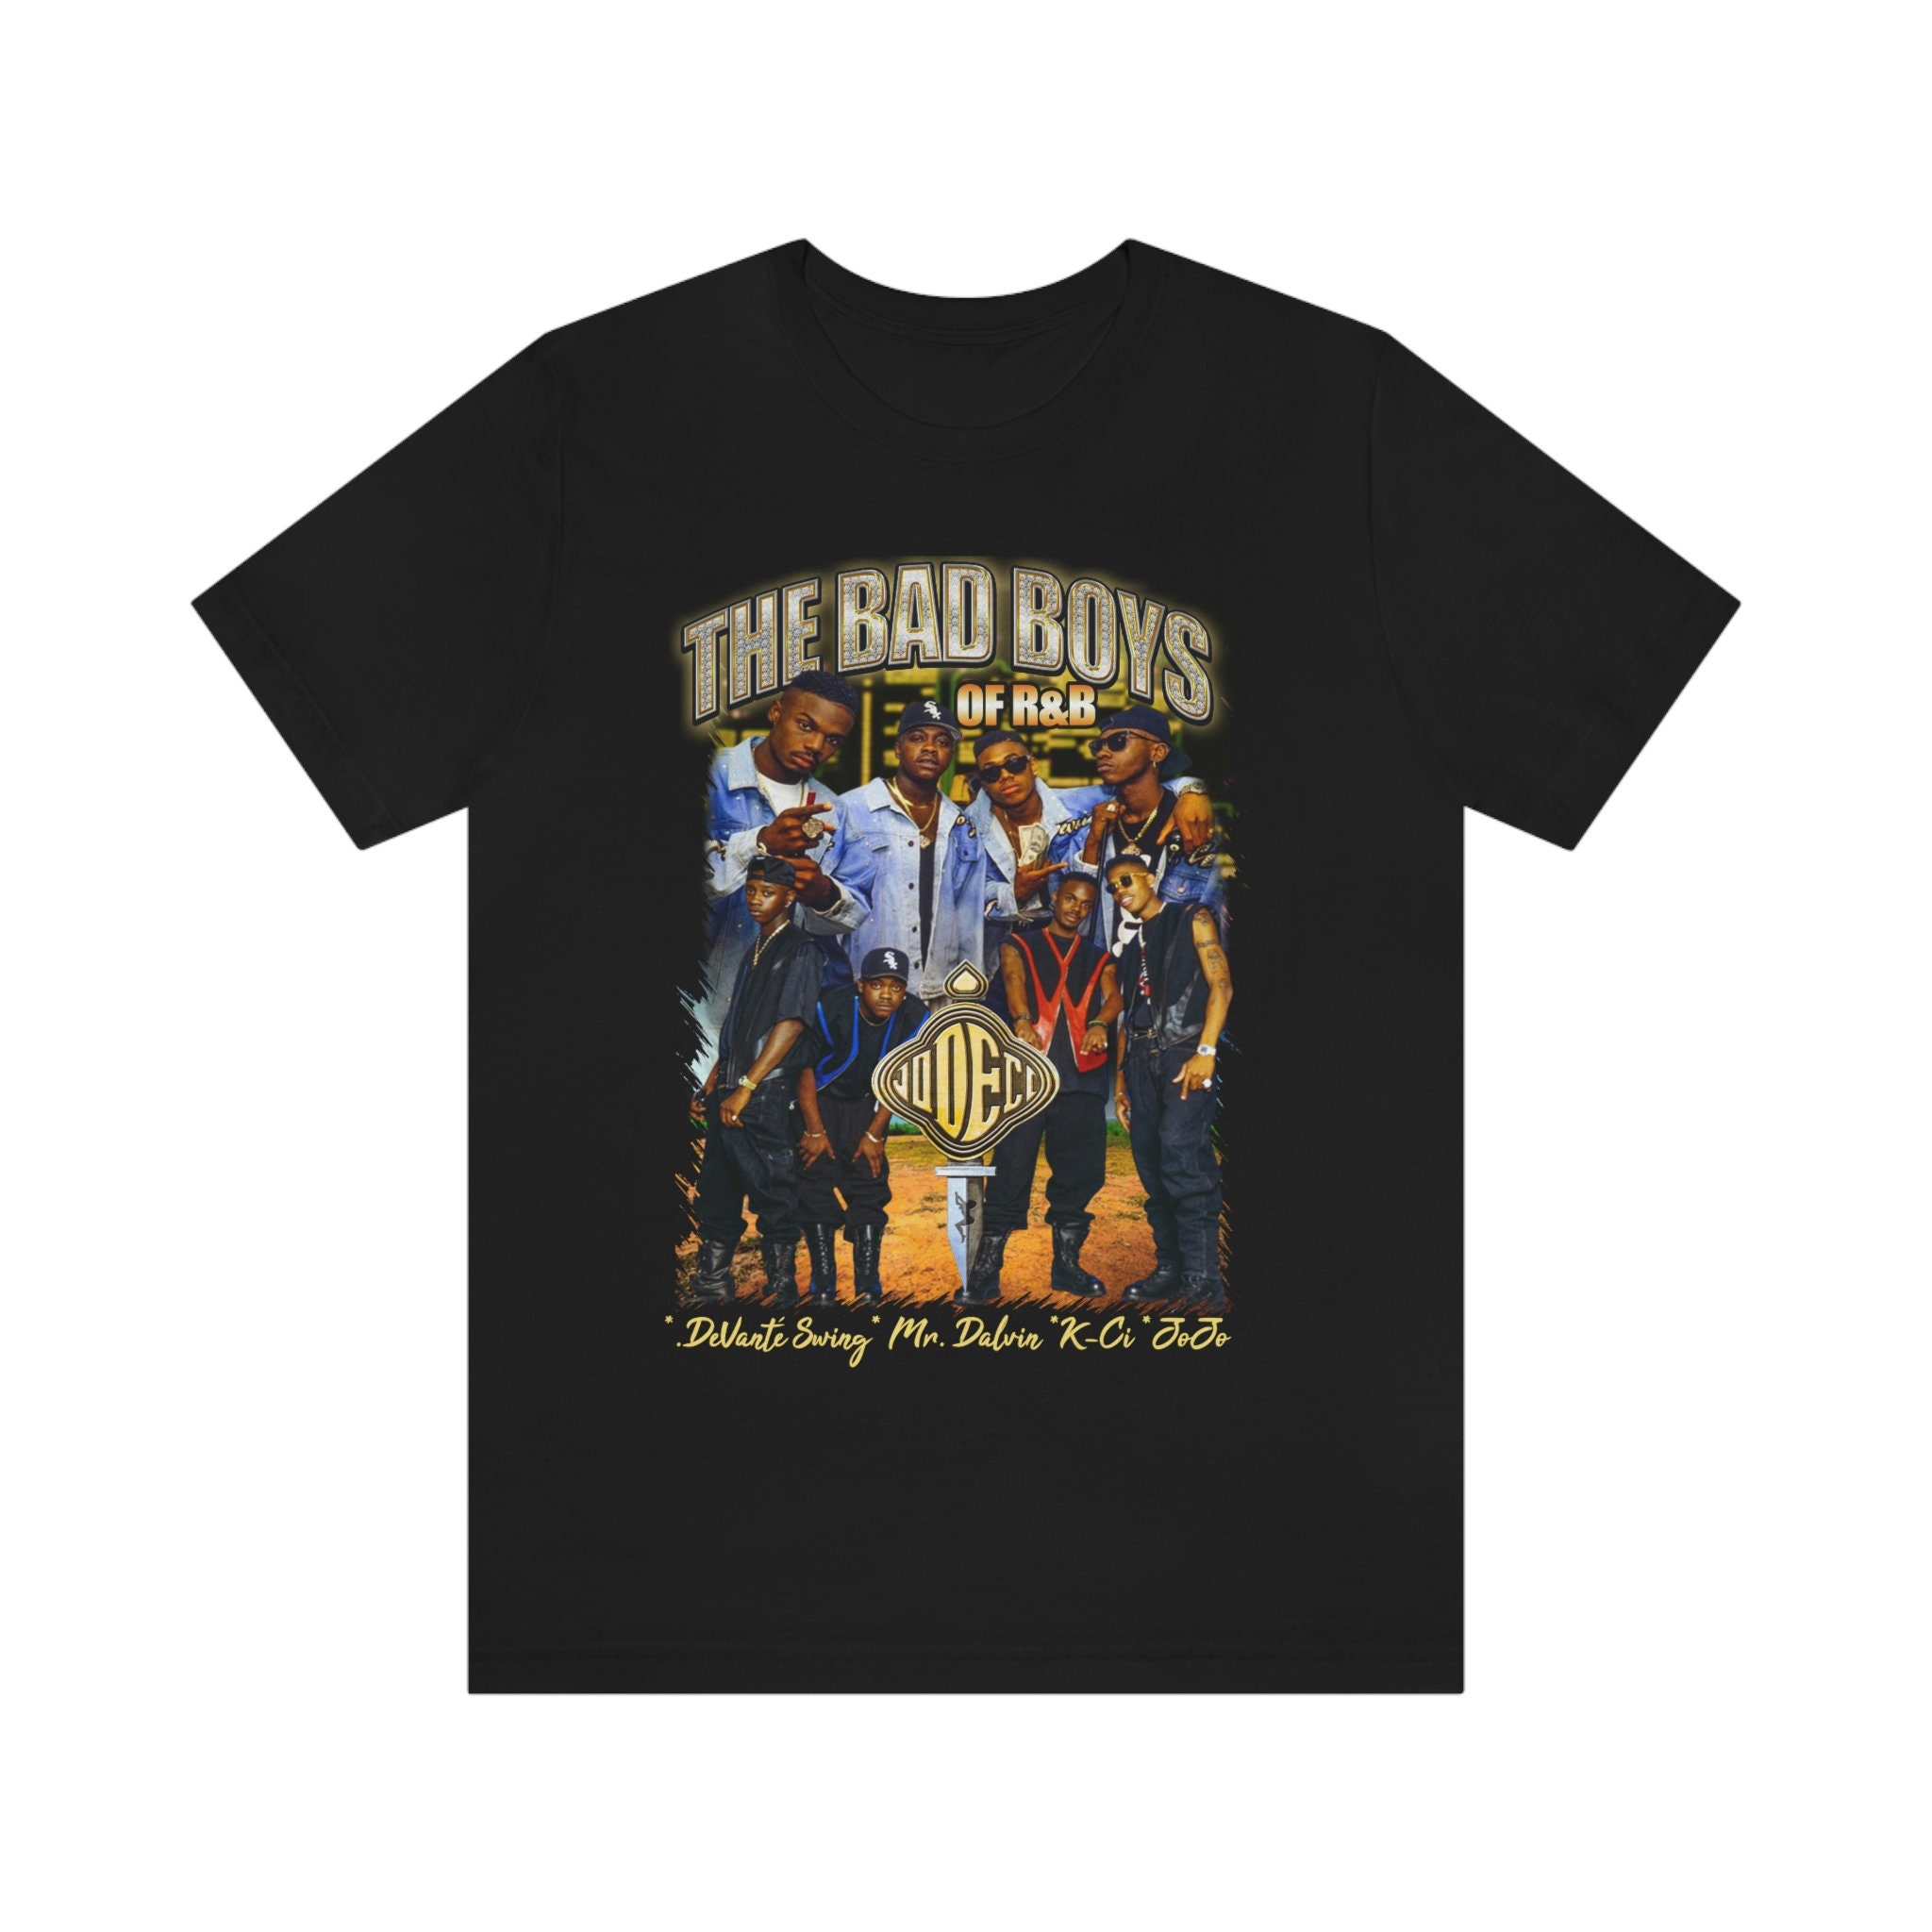 Jodeci 90s Style Vintage Bootleg Tee graphic T shirt , Vintage Inspired 90's Rap R&B Sports  T-Shirt